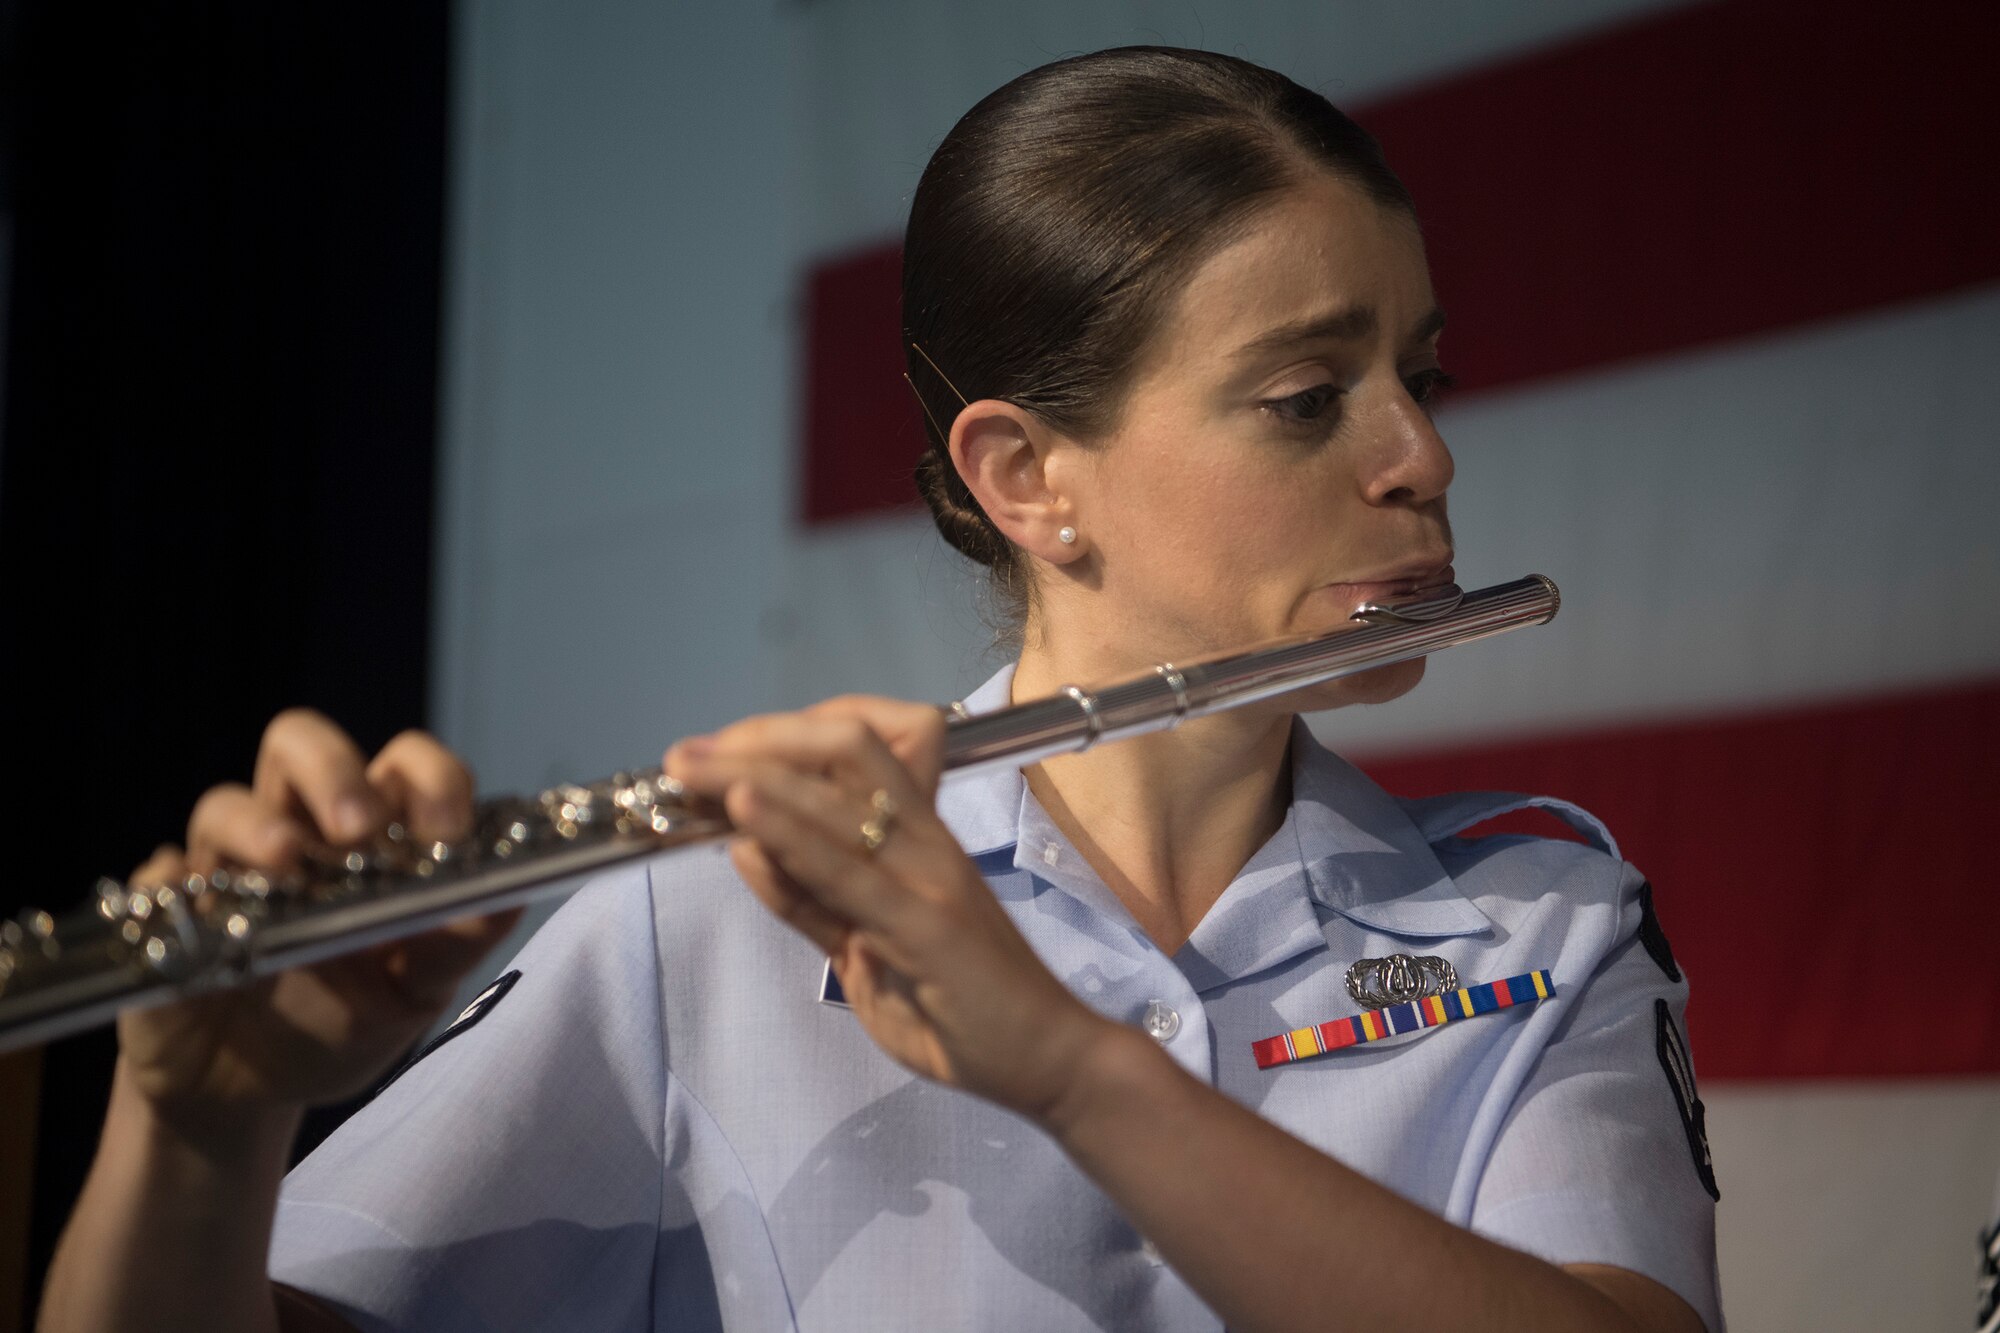 Airman 1st Class Andrea Murano, a flute player with the U.S. Air Force Heritage Winds, performs for veterans and community members June 6, 2019, in Mount Pleasant, S.C.